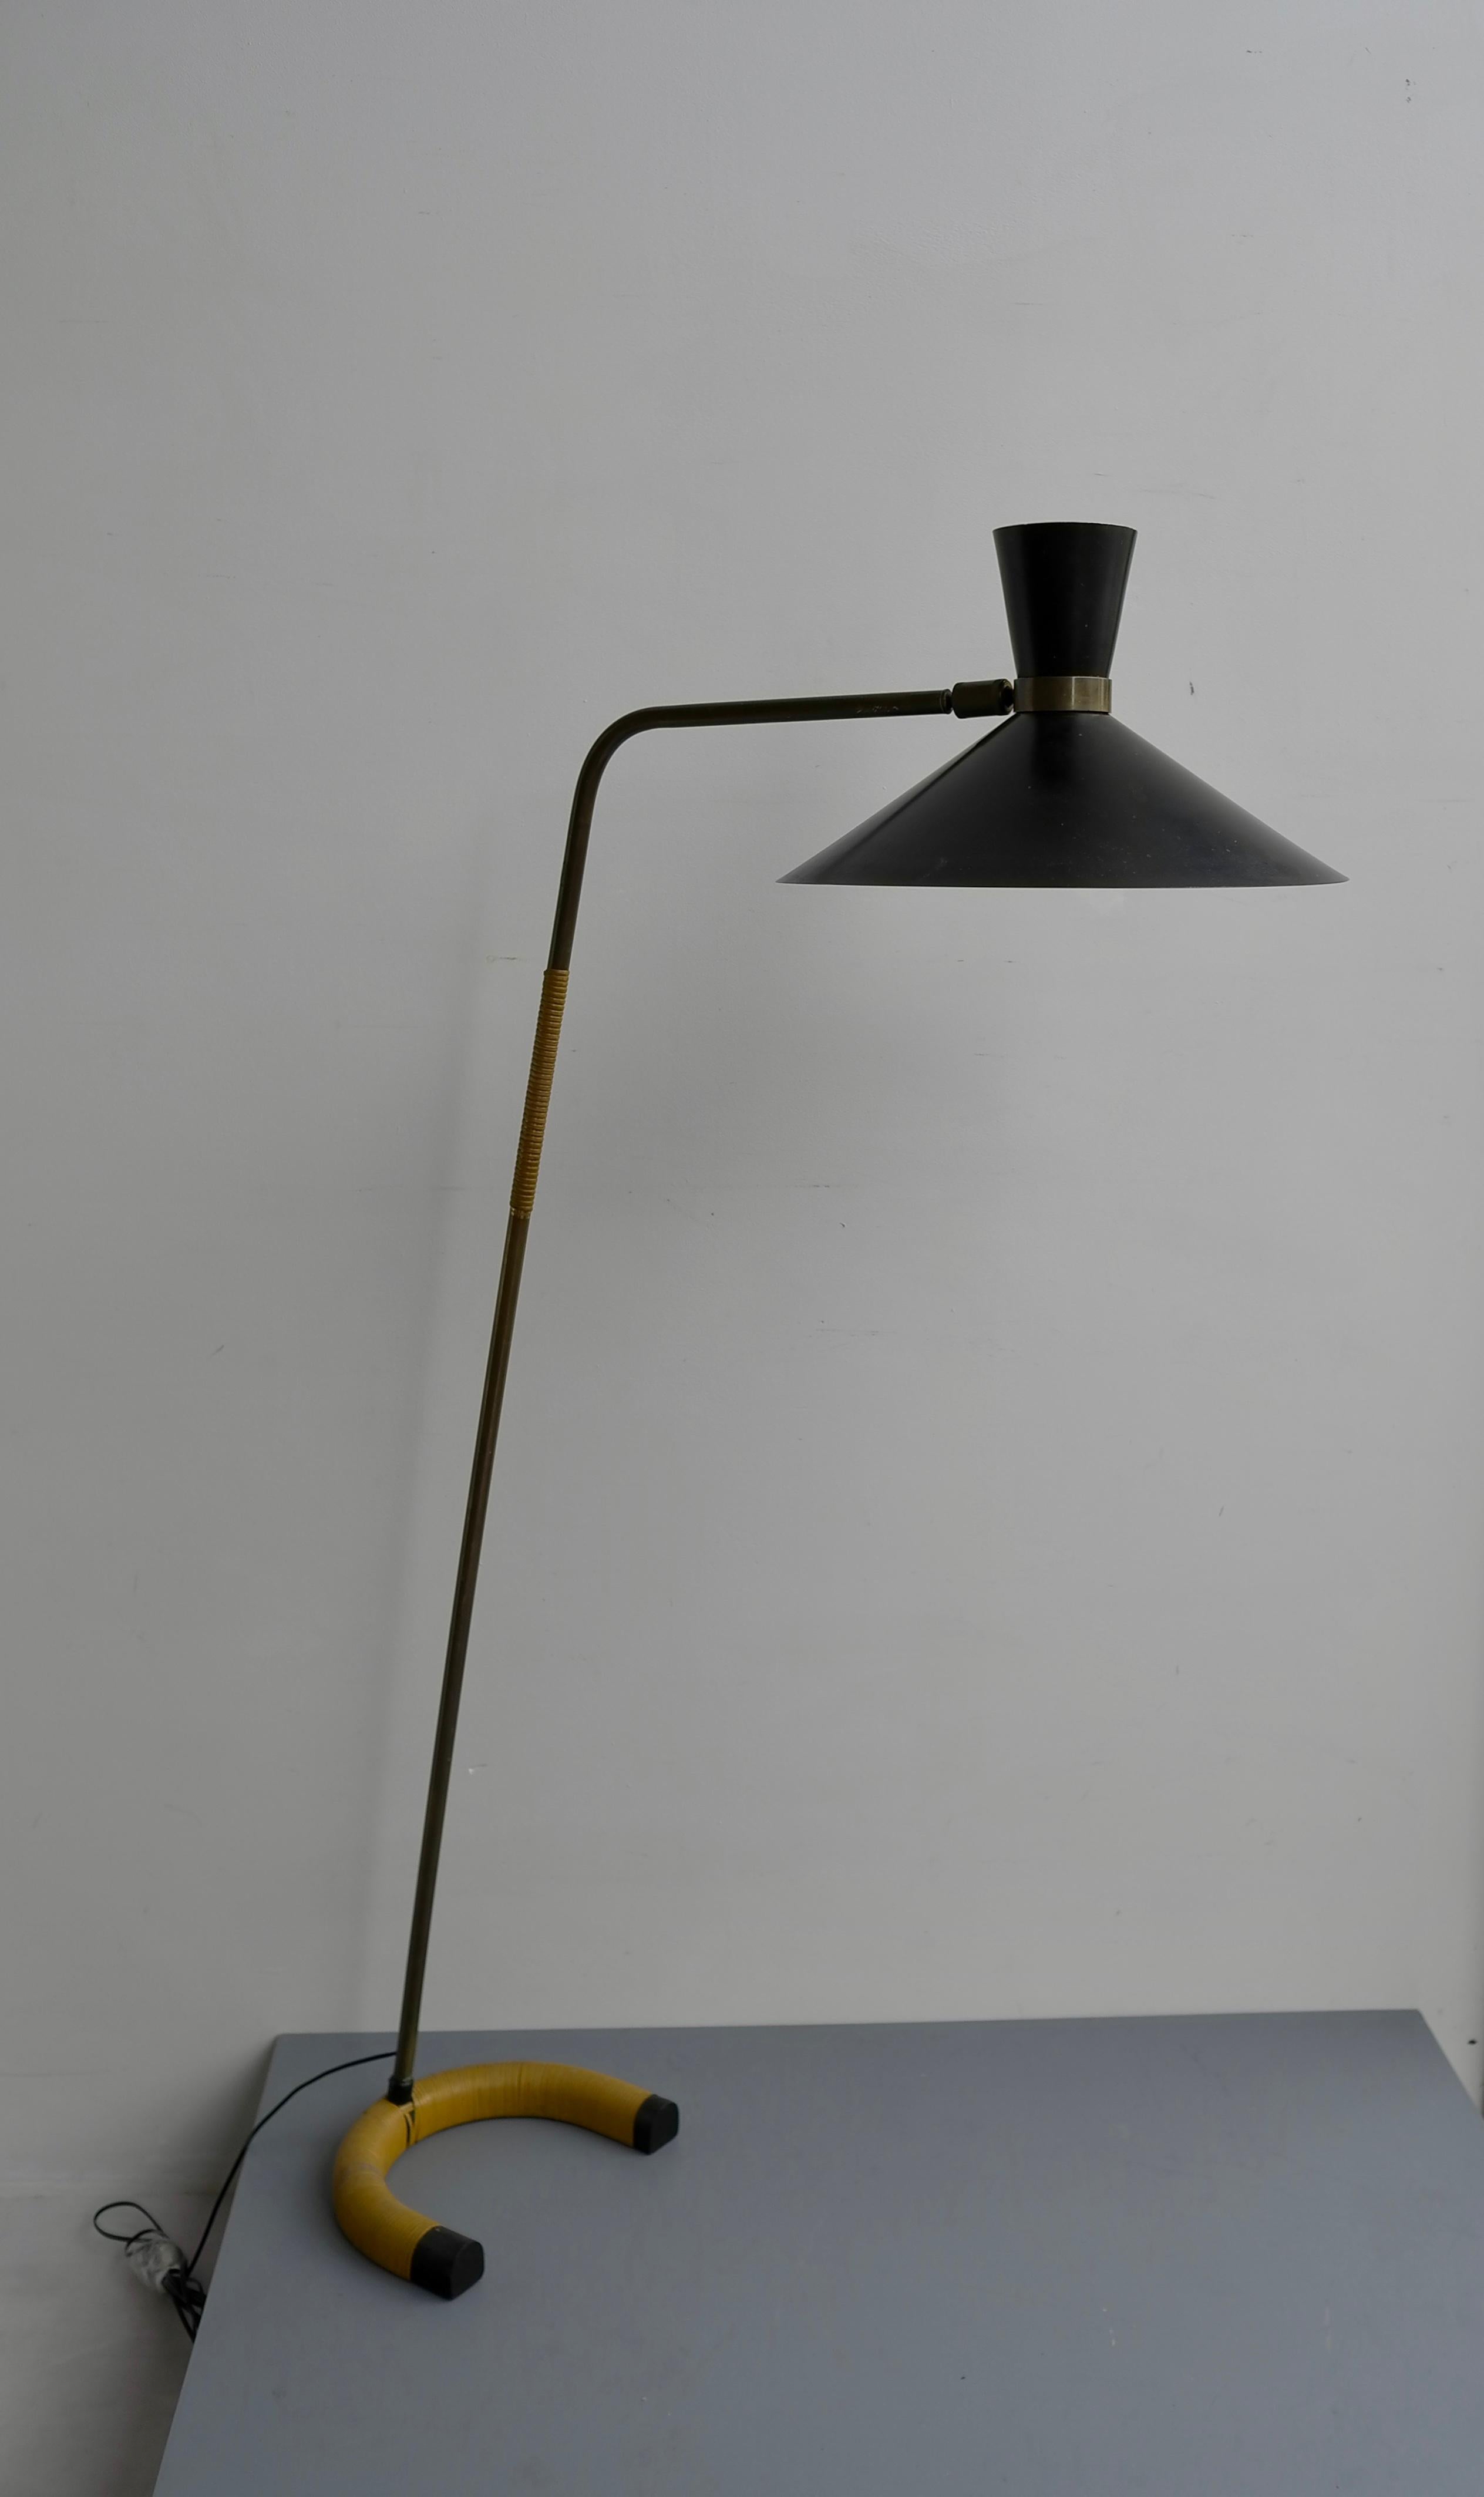 Rare Floor Lamp by Jacques Biny in Brass and Black Hood Edition Luminalite, 1953 For Sale 2